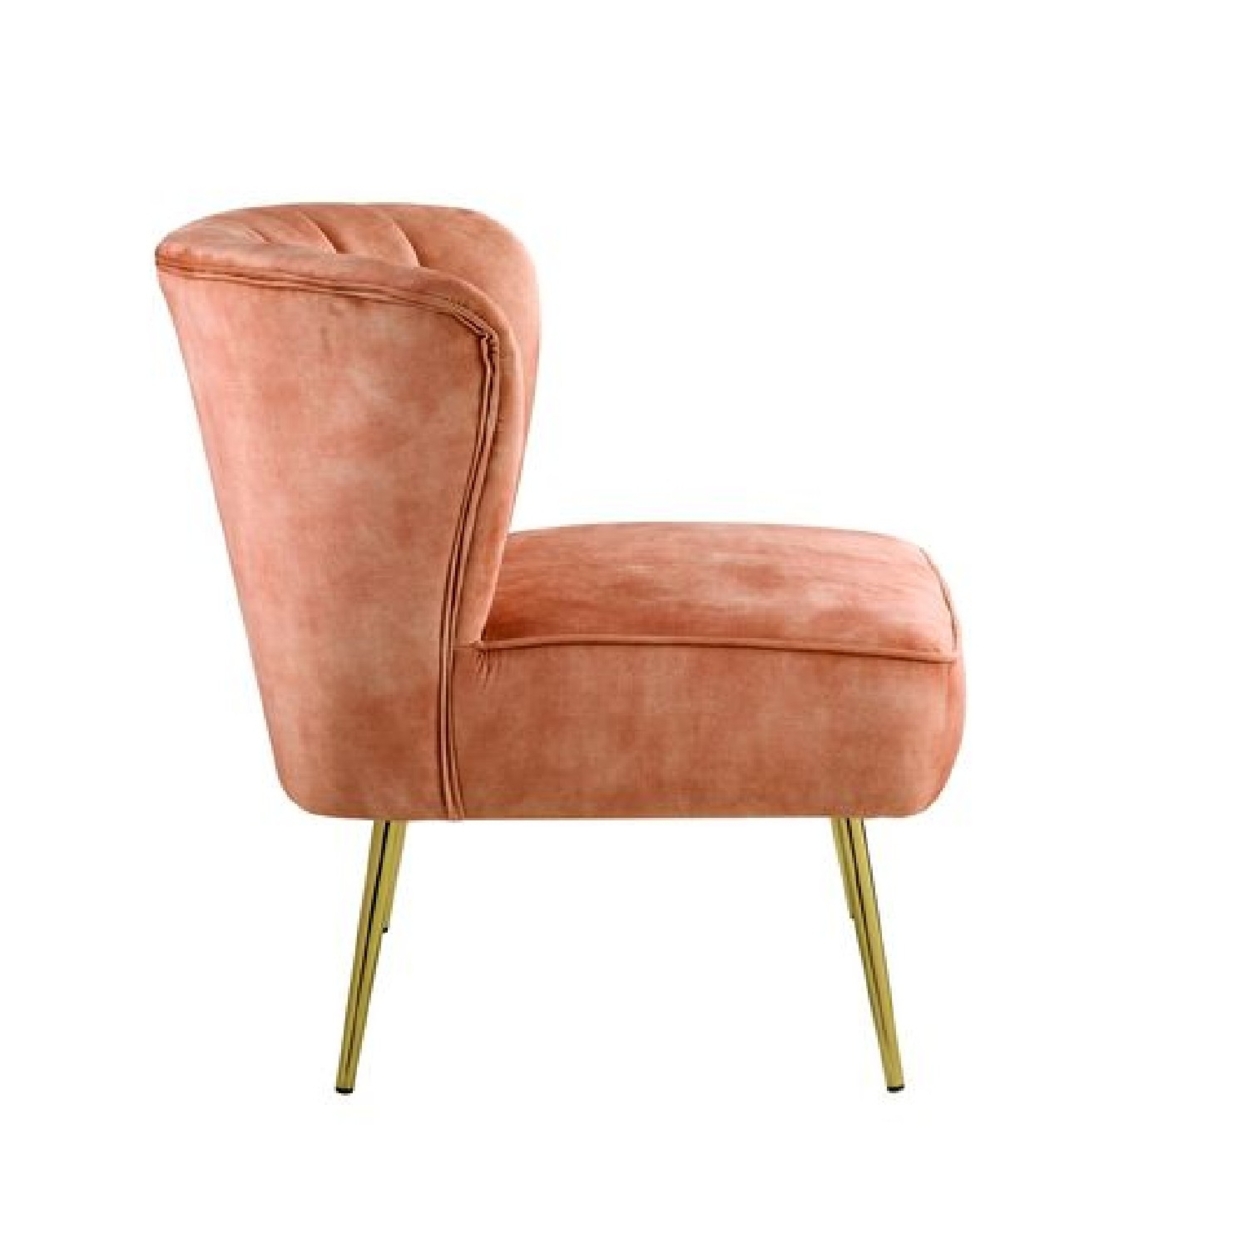 Accent Chair With Curved Tufted Back, Orange And Gold- Saltoro Sherpi